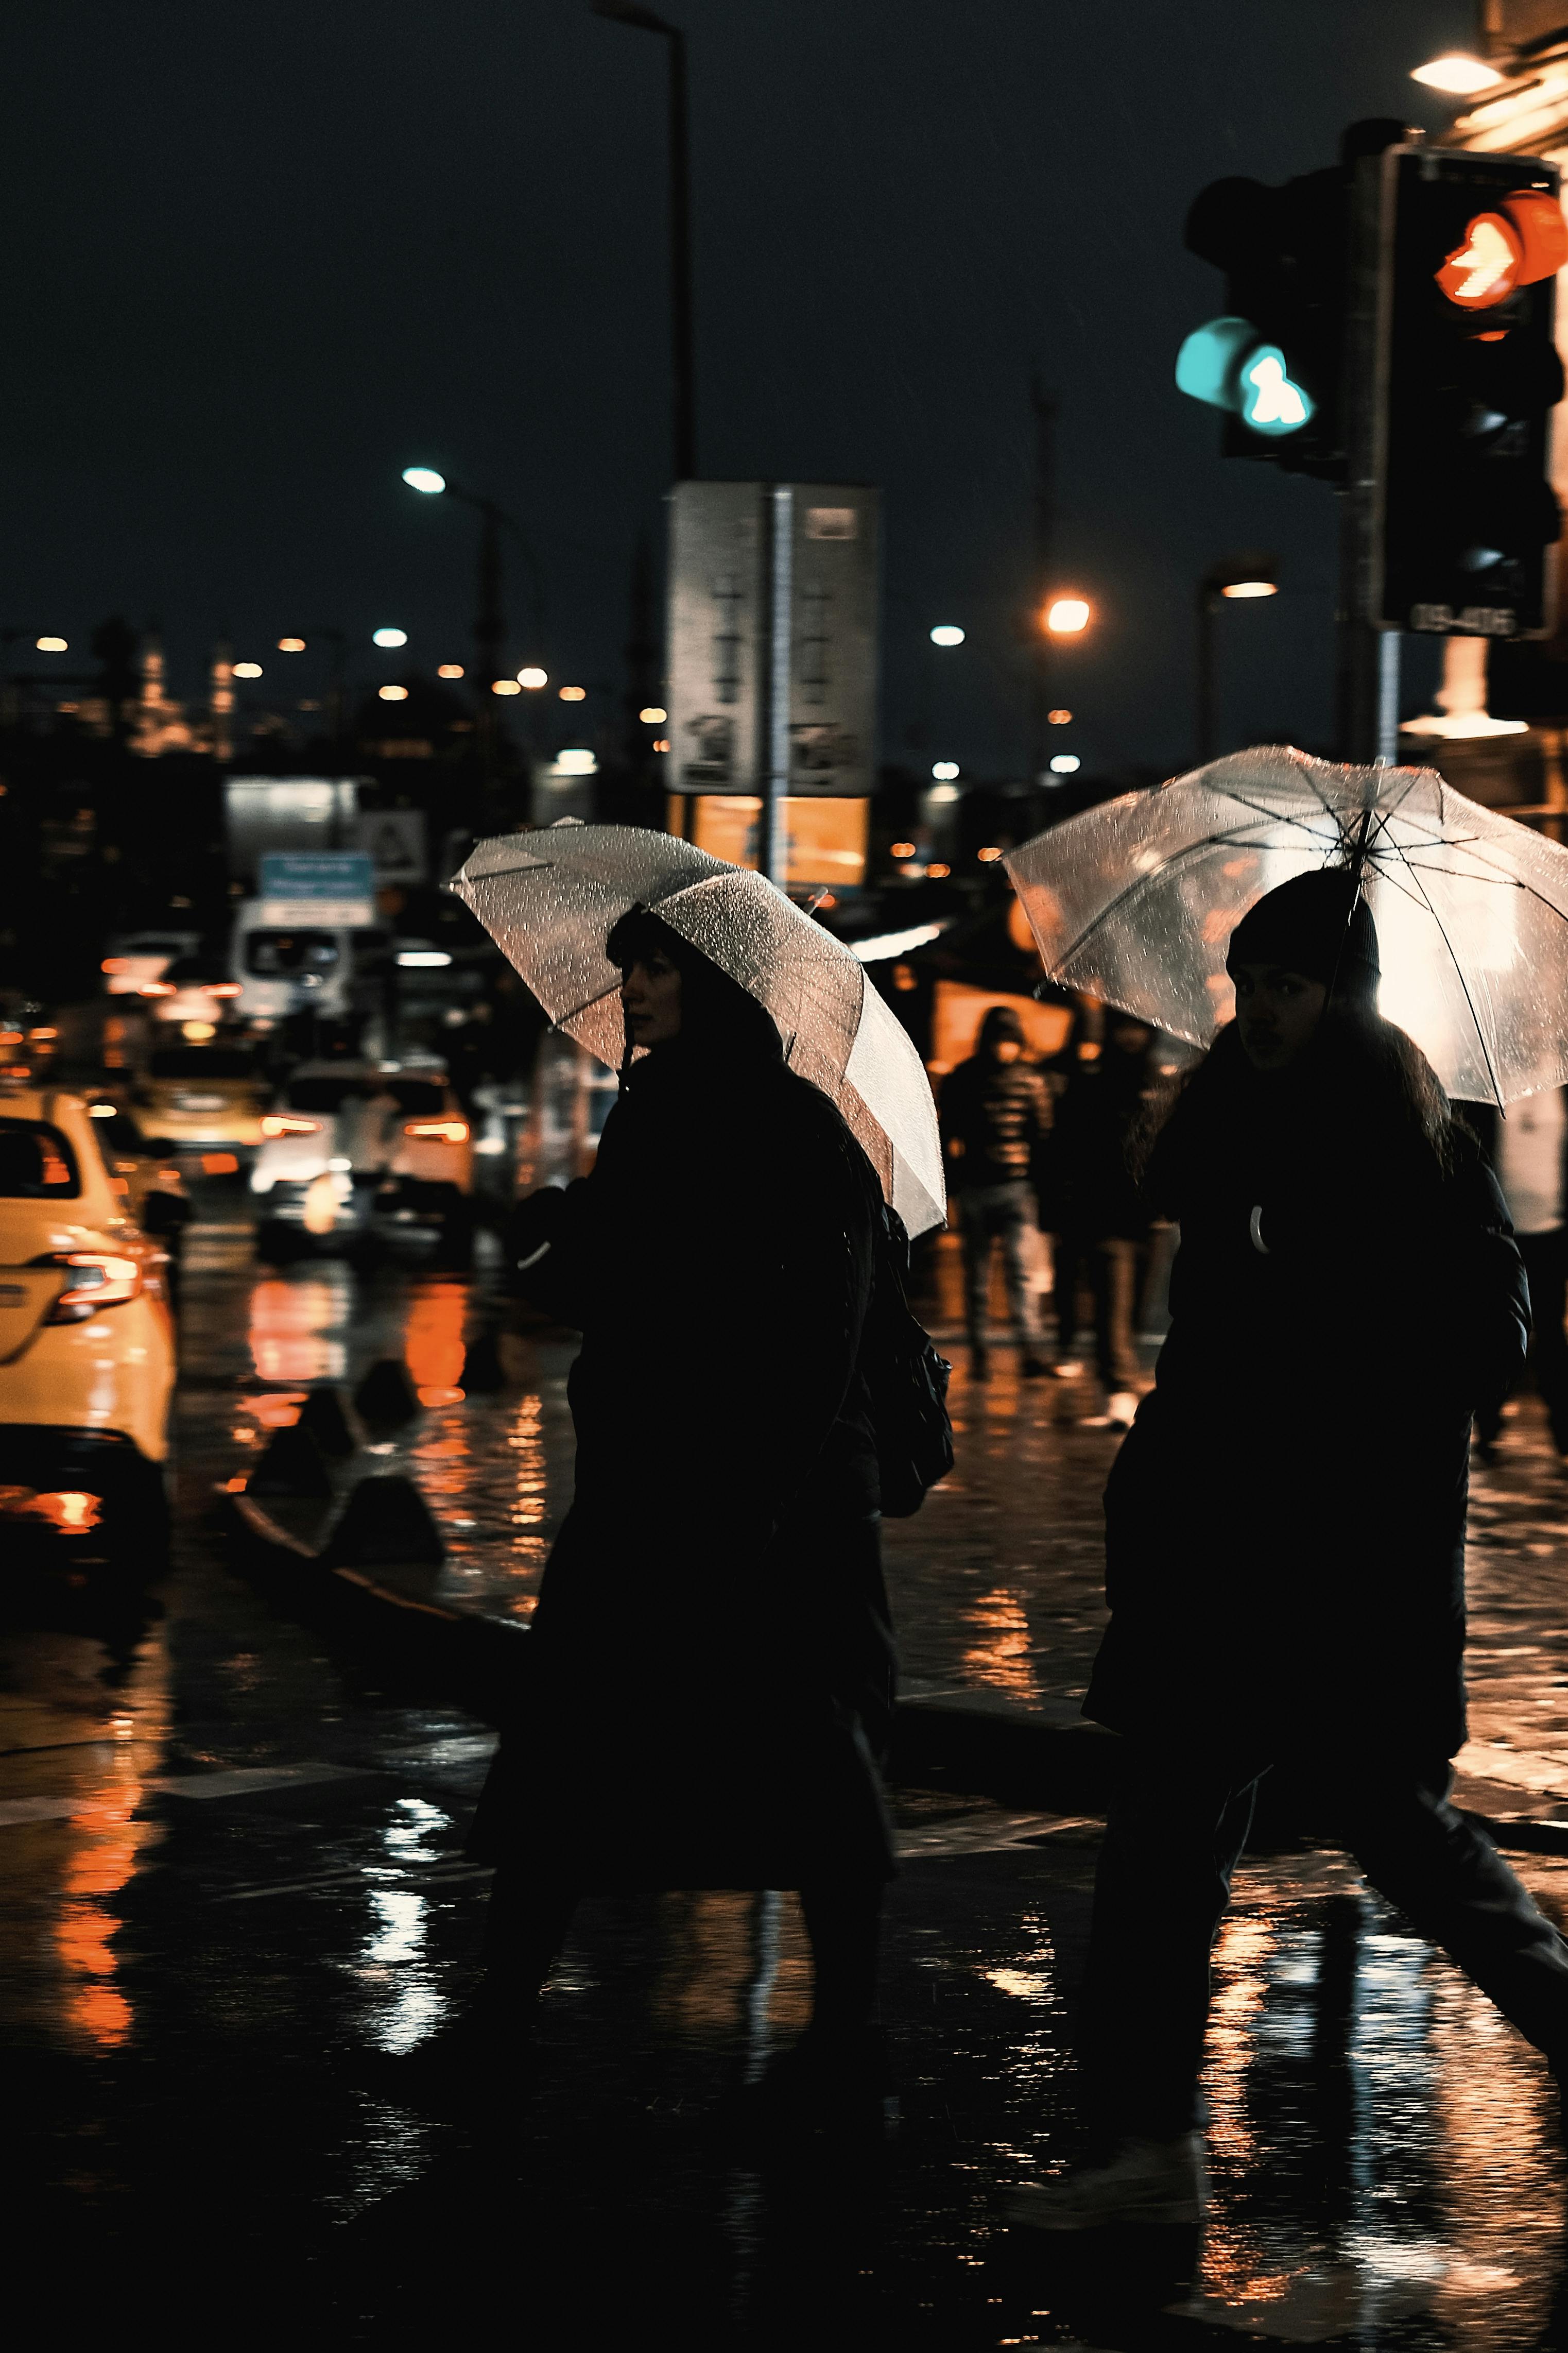 Strangers in the night, The walk of the umbrella